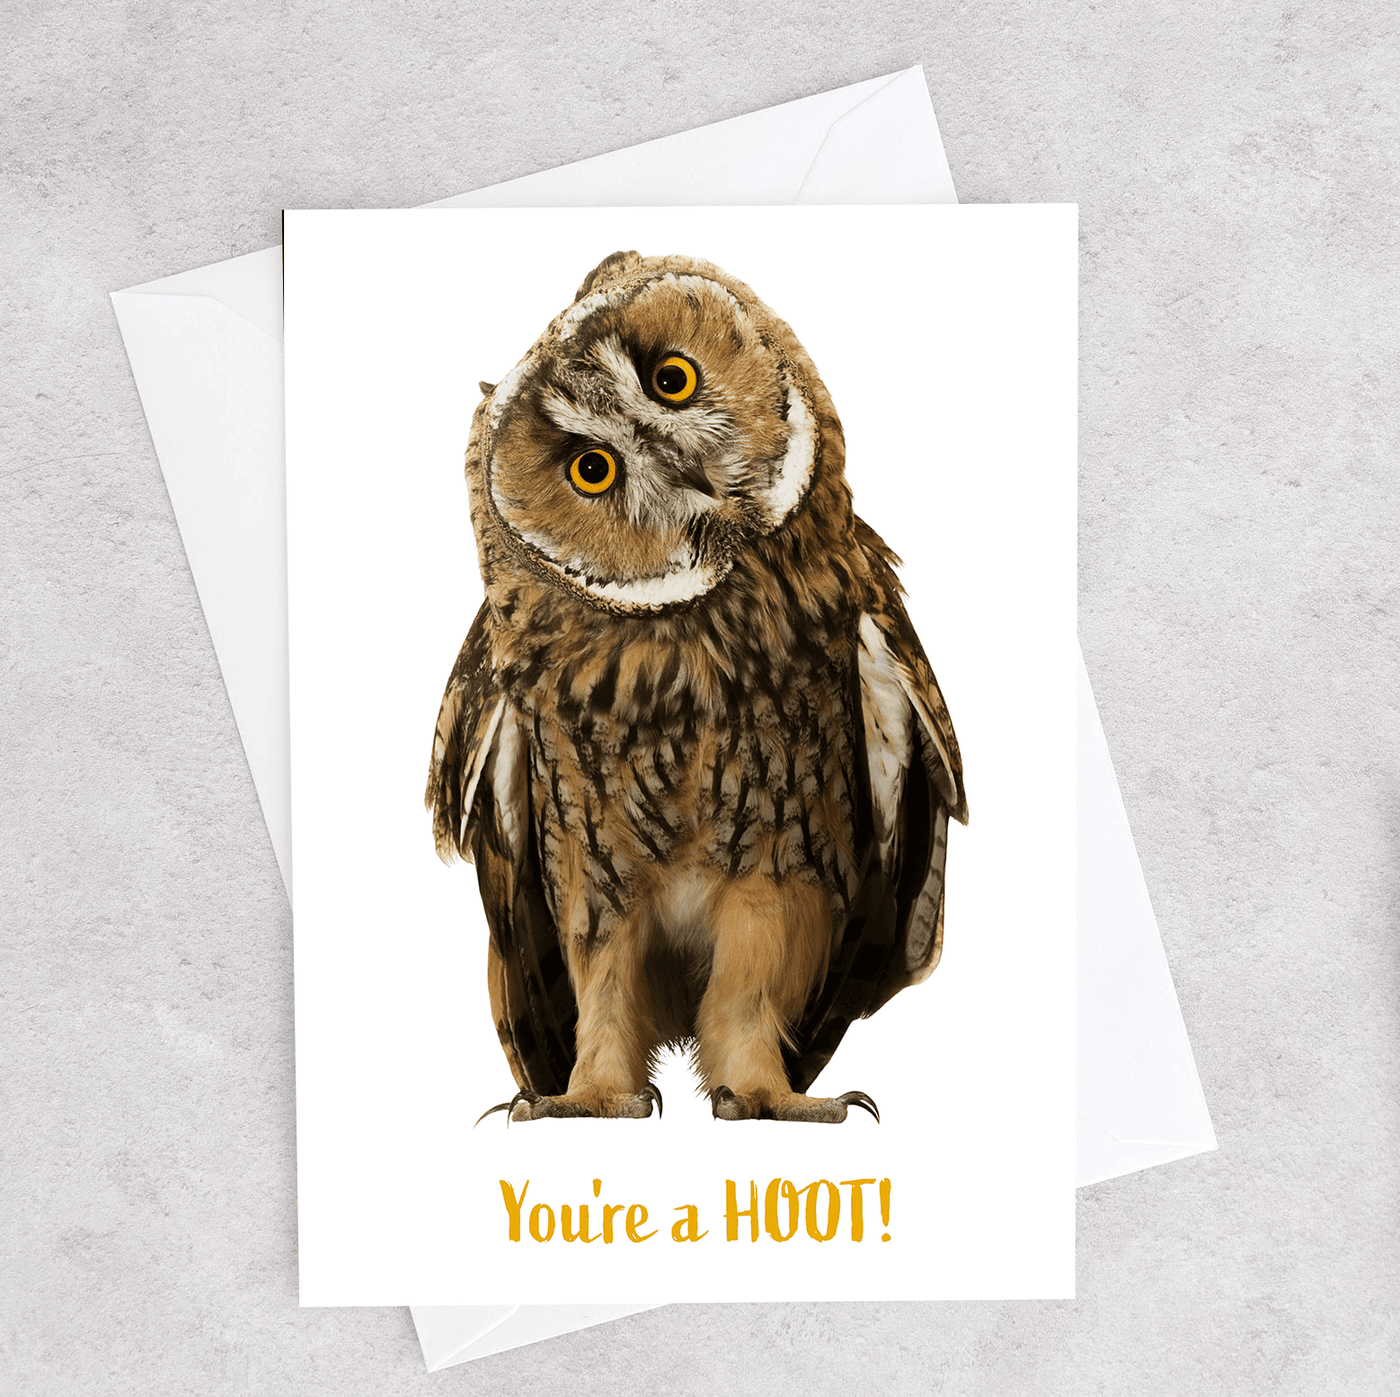 This greeting card shows an Owl and says "You're a Hoot!"